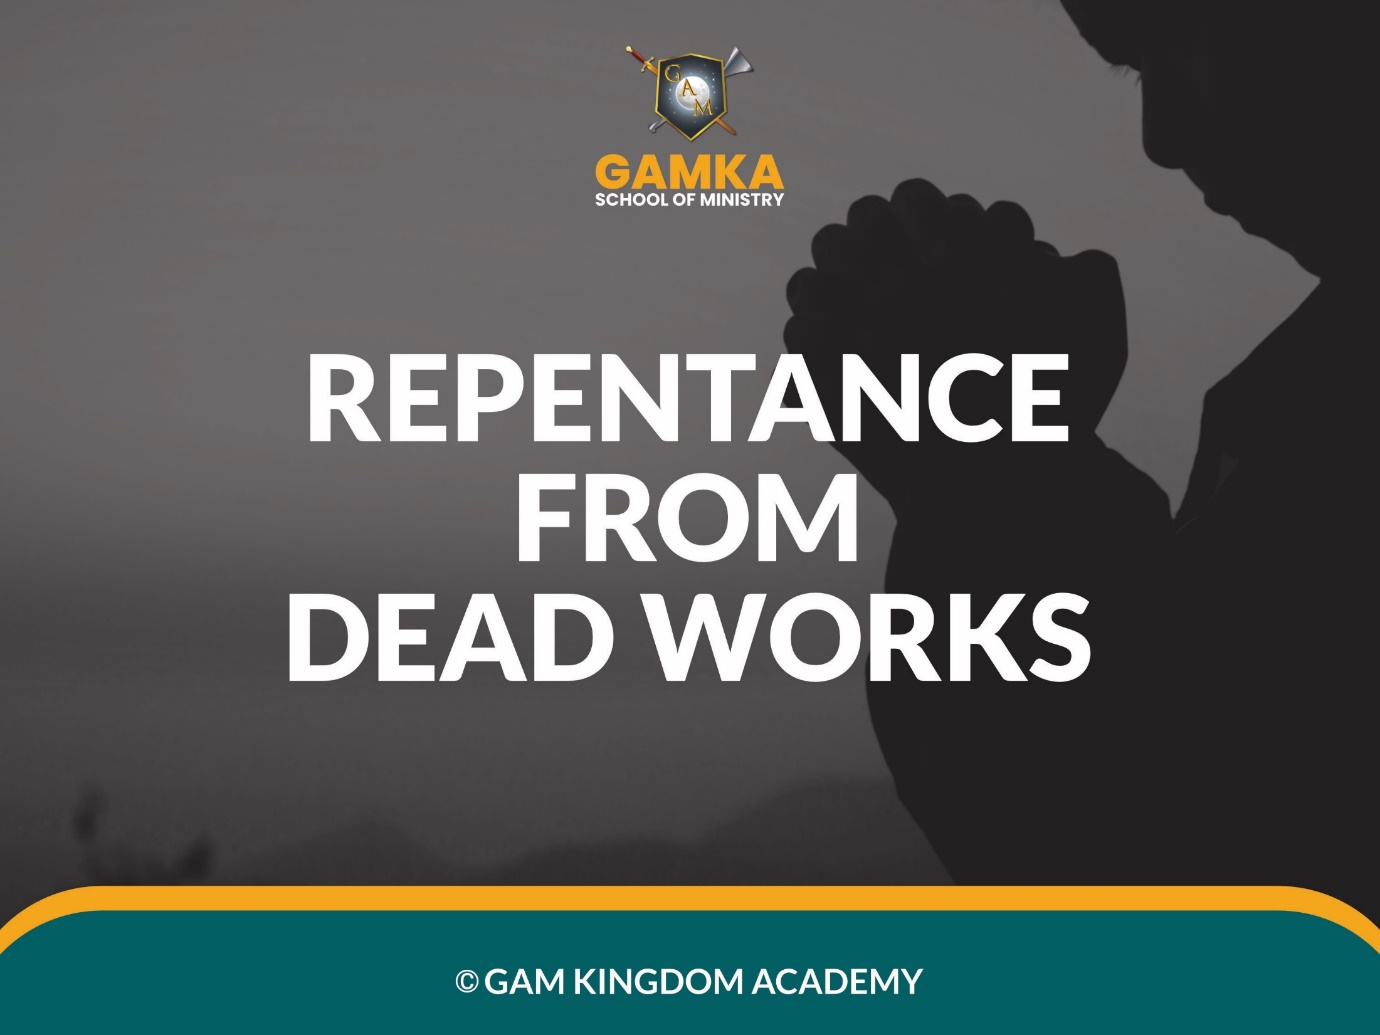 Repentance from Deadworks